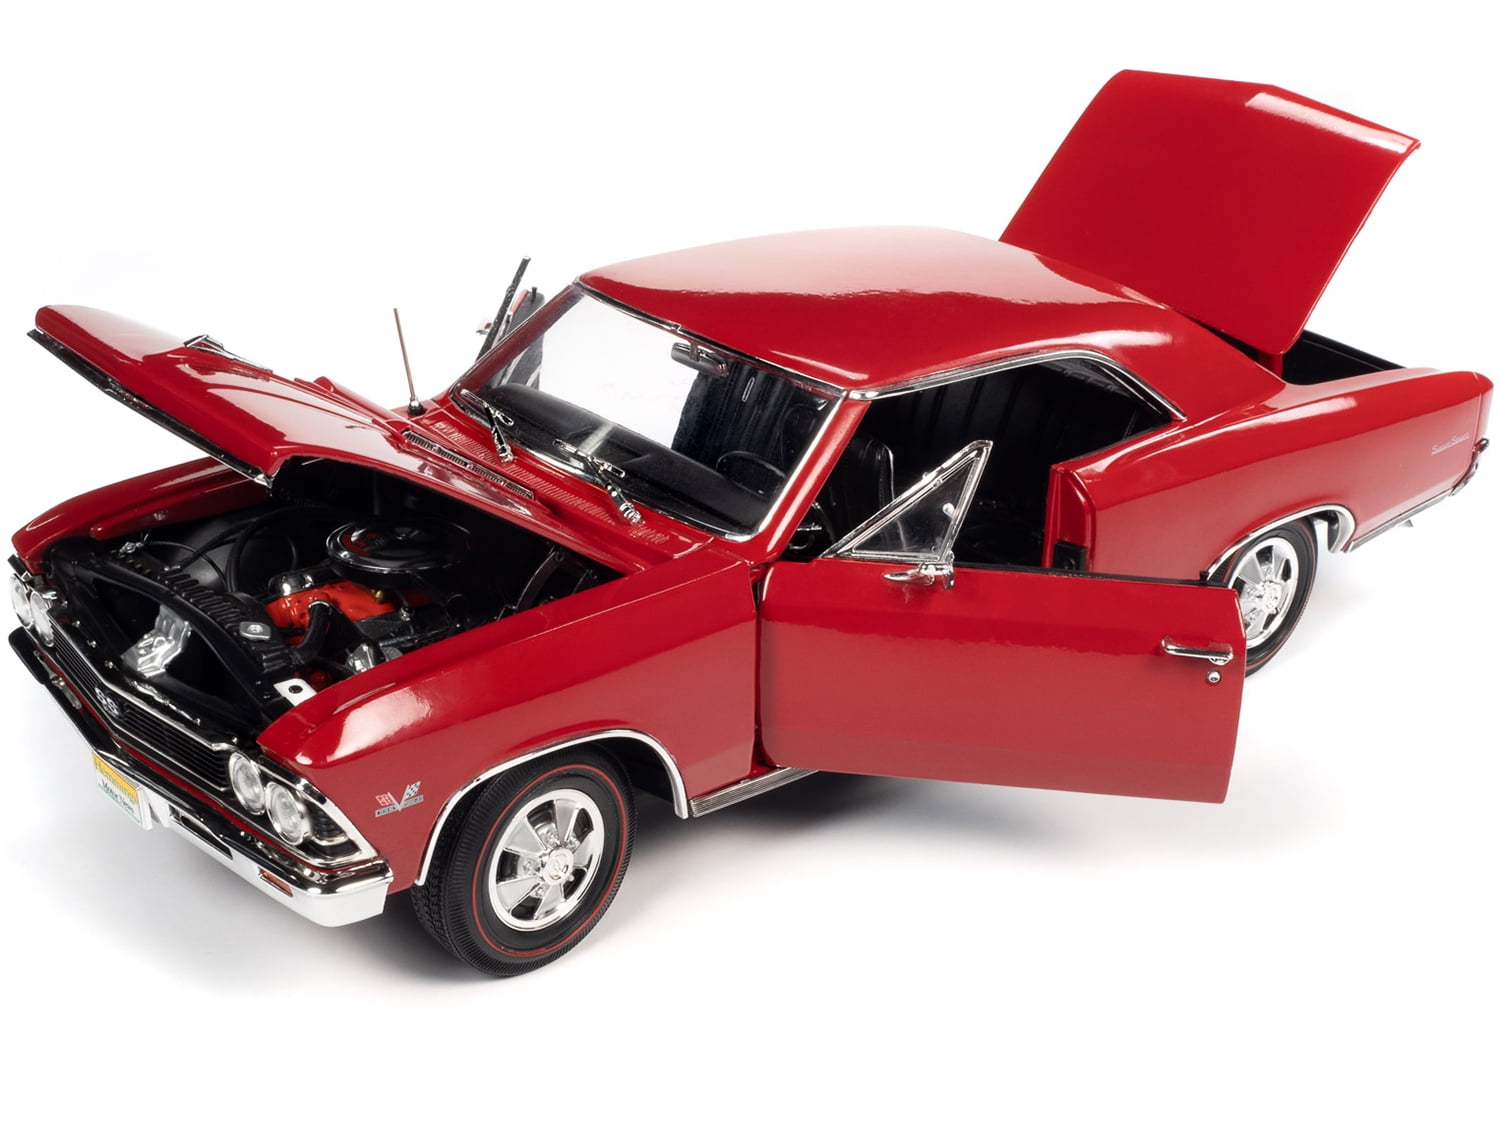 Autoworld AMM1233 1966 Chevrolet Chevelle SS 396 Hardtop Regal Red Hemmings  Motor News Magazine Cover Car April 2013 1 by 18 Diecast Model Car